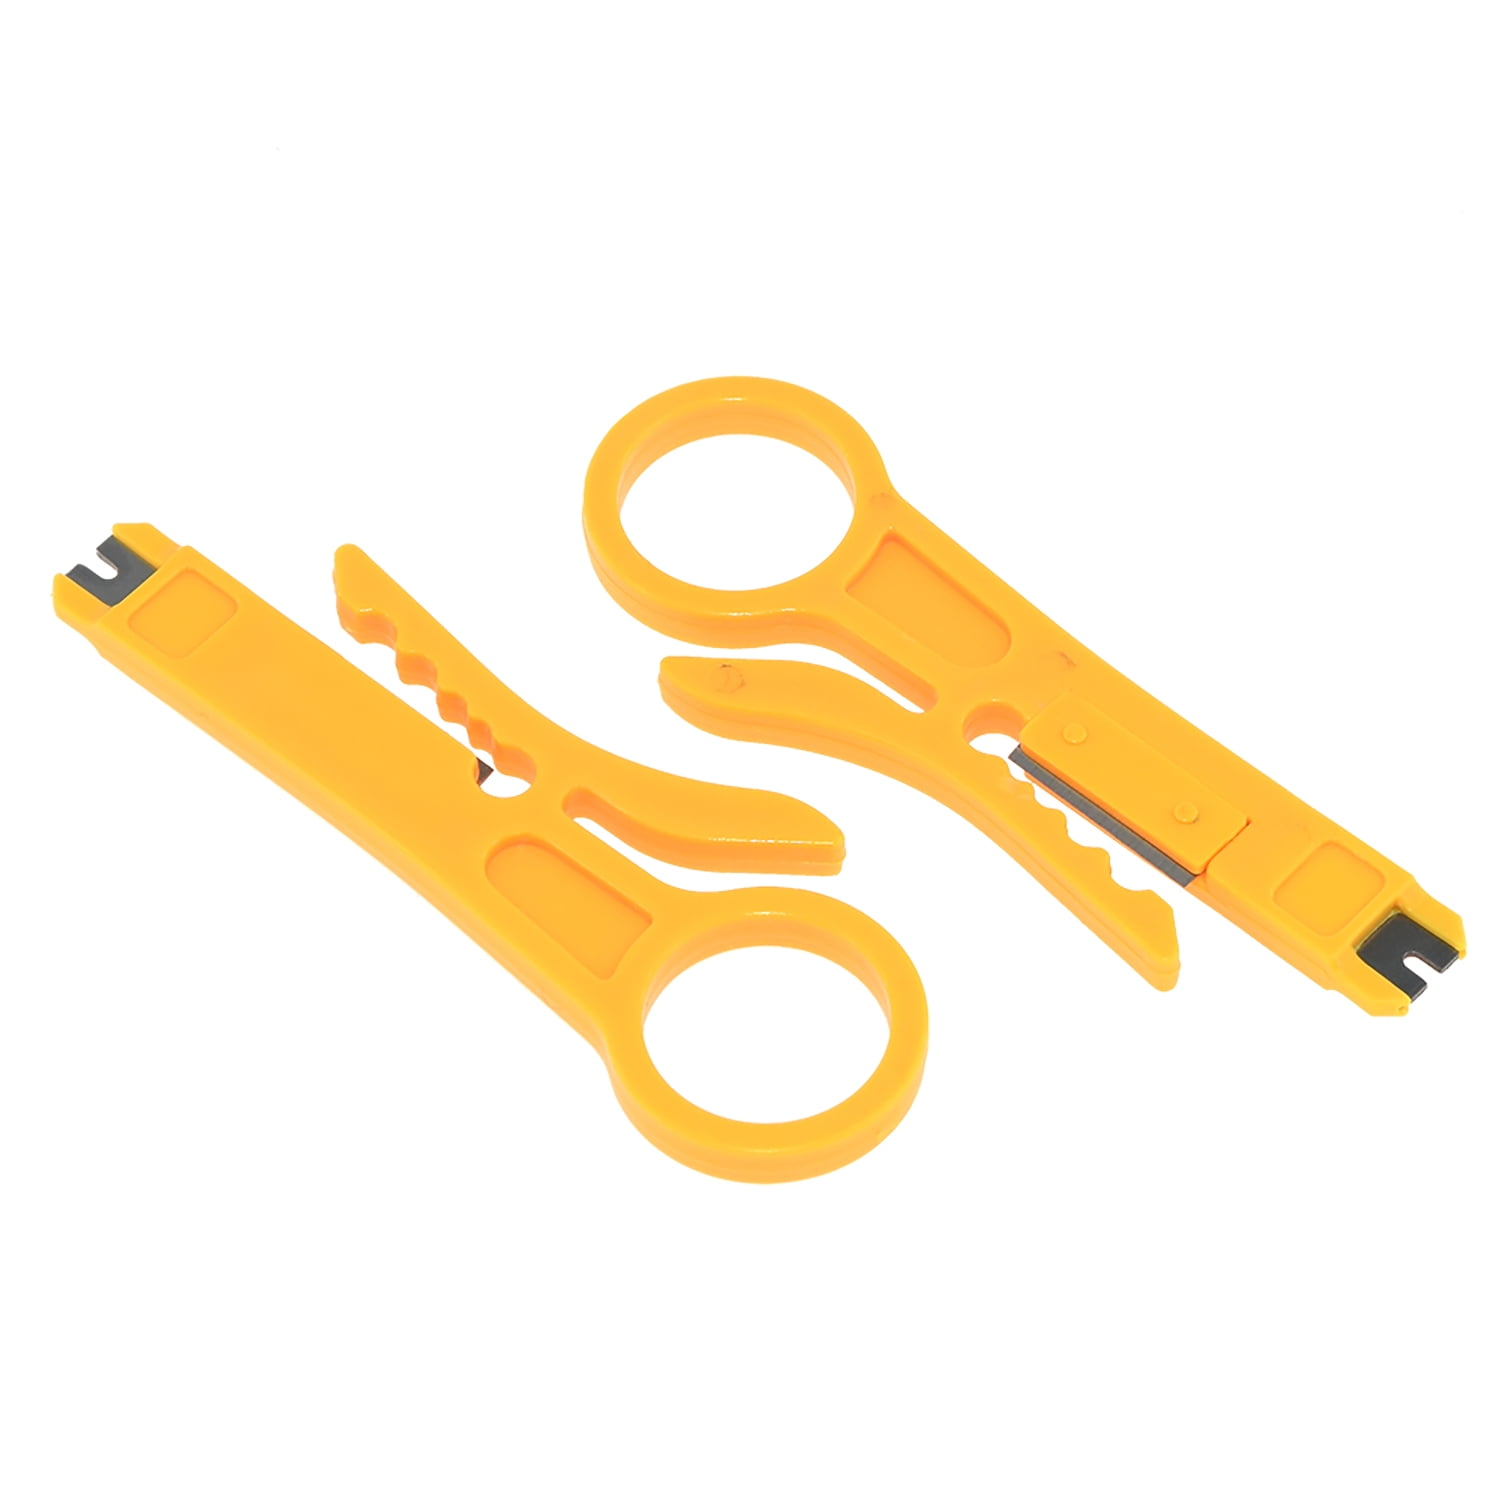 Practical Mini Wire Cutter Blade Small Yellow Wire Stripper Stripping Cutter D 